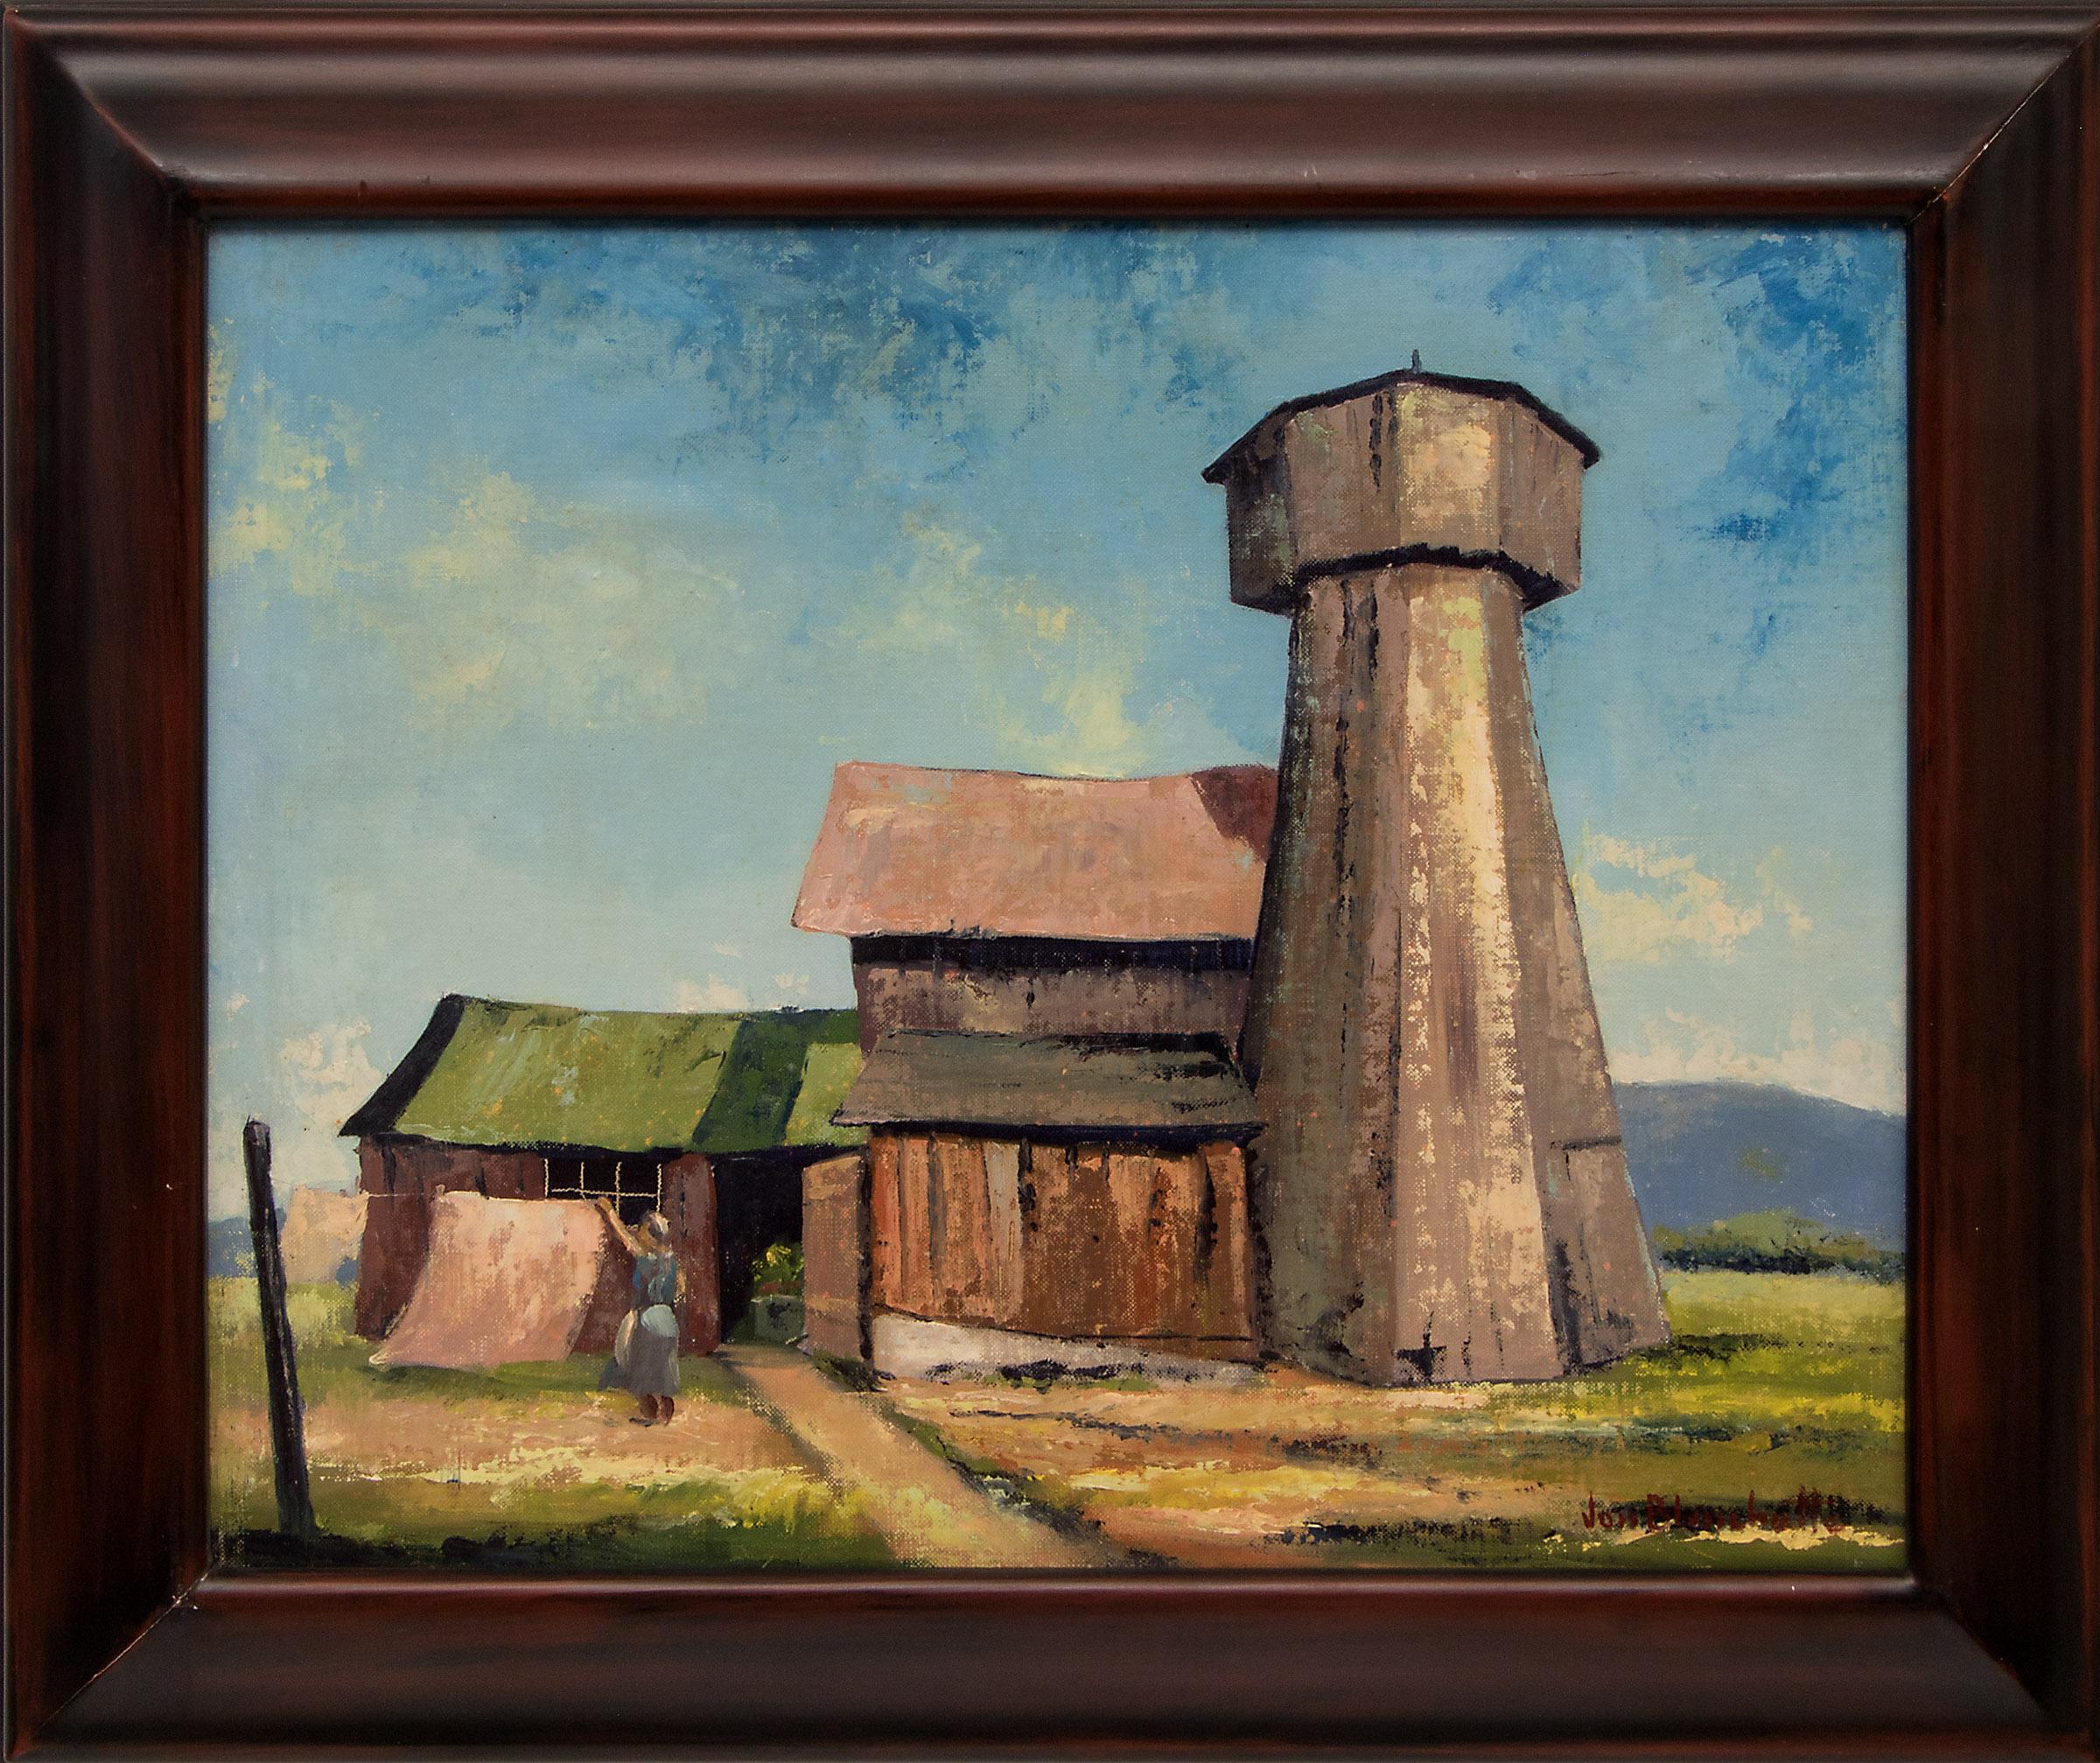 In Soquel, California, 1950s Farm Landscape with Silo, Blue, Green, Gold, Gray - Painting by Jon Blanchette